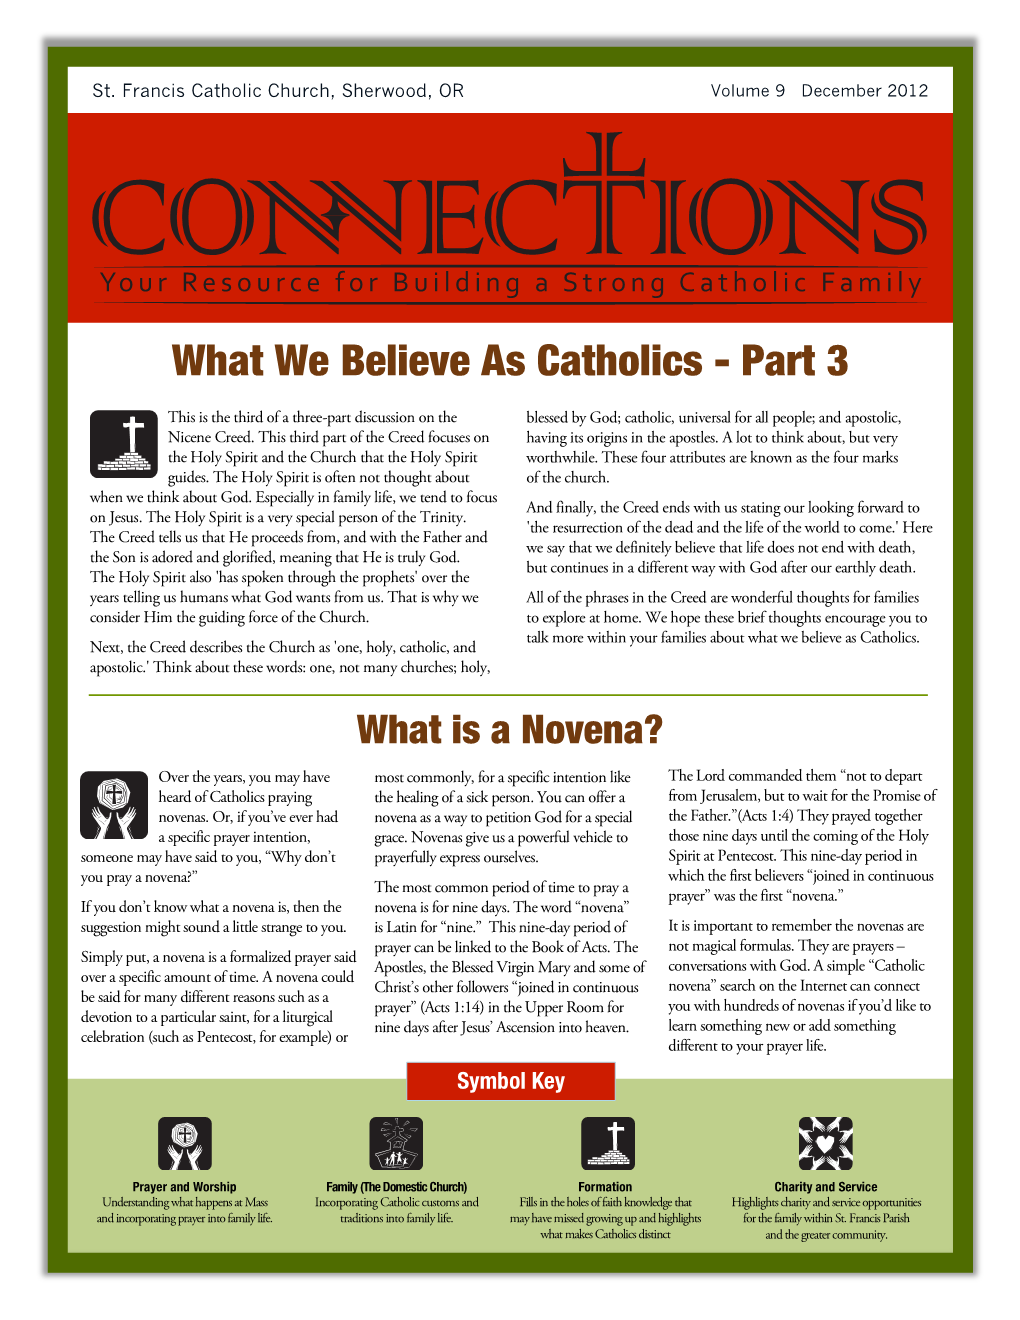 What We Believe As Catholics - Part 3